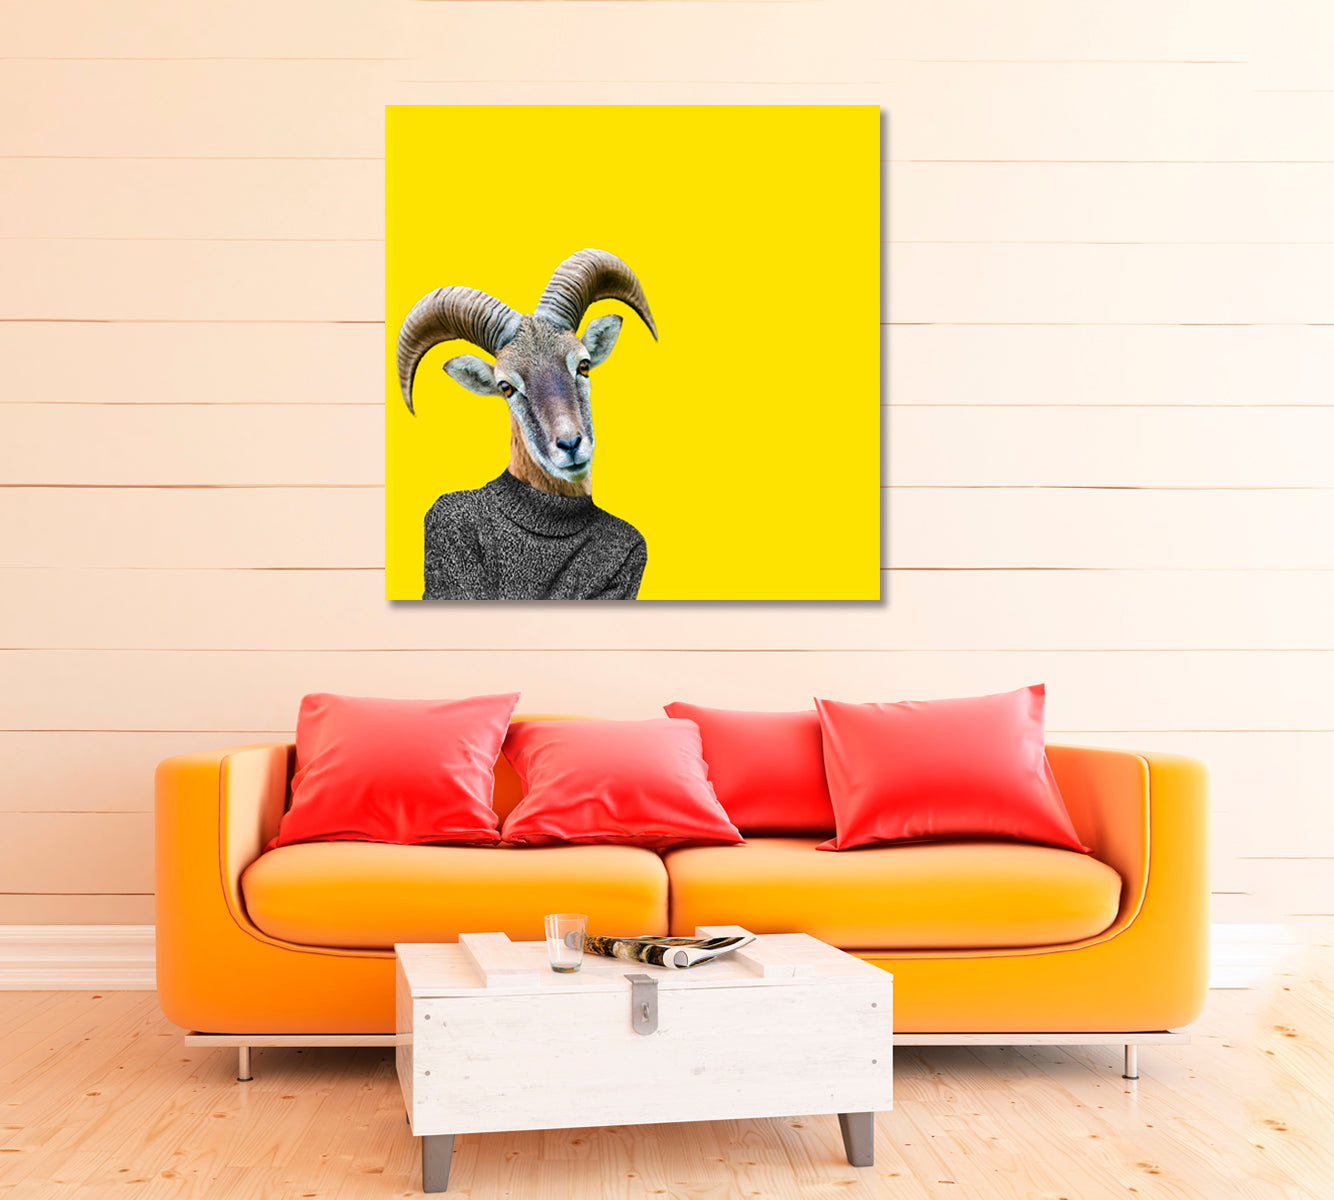 Goat in Sweater Canvas Print ArtLexy 1 Panel 12"x12" inches 